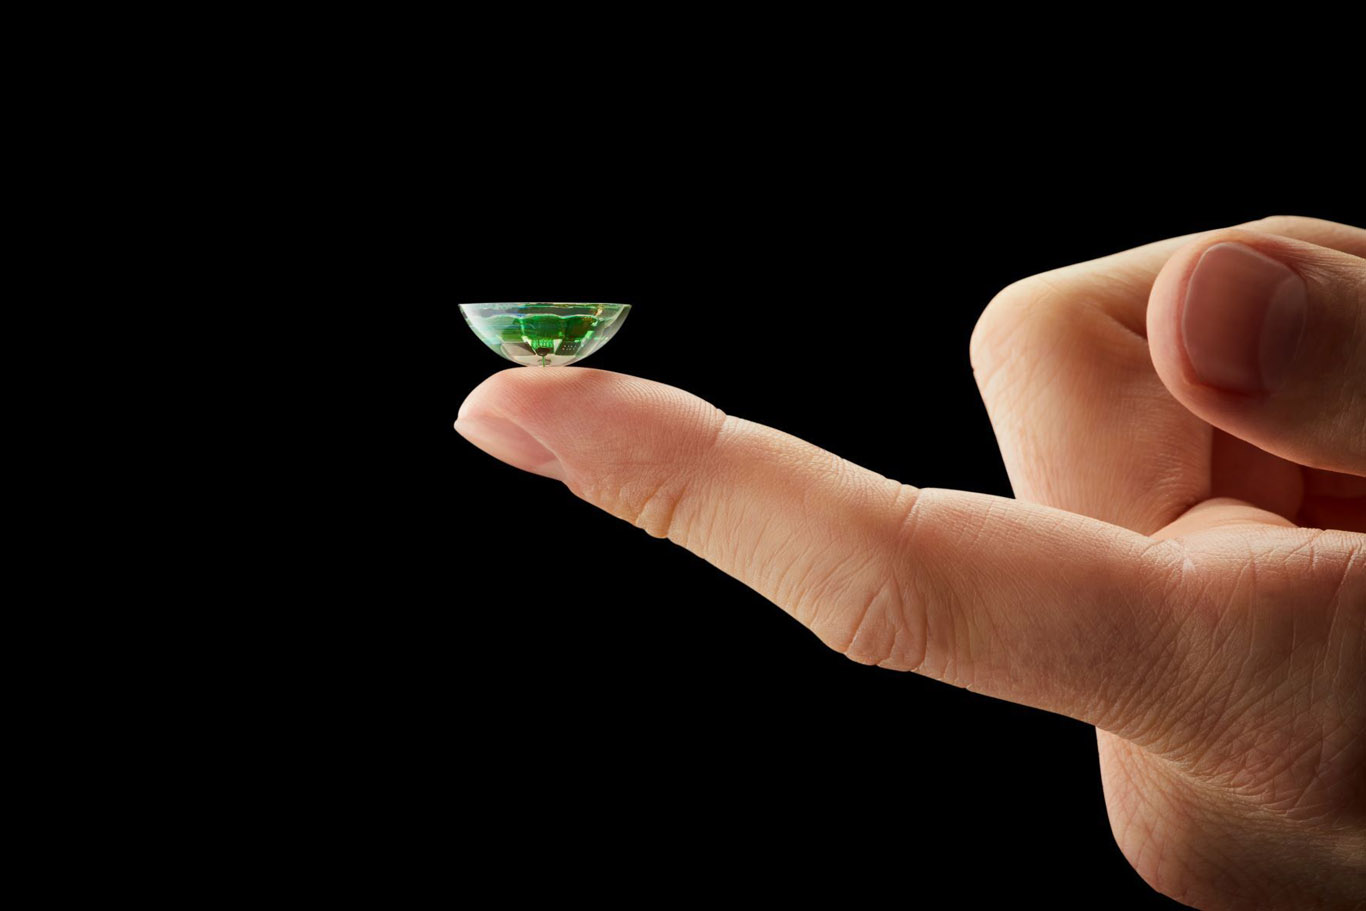 Mojo Vision smart contact lenses are now “feature complete”